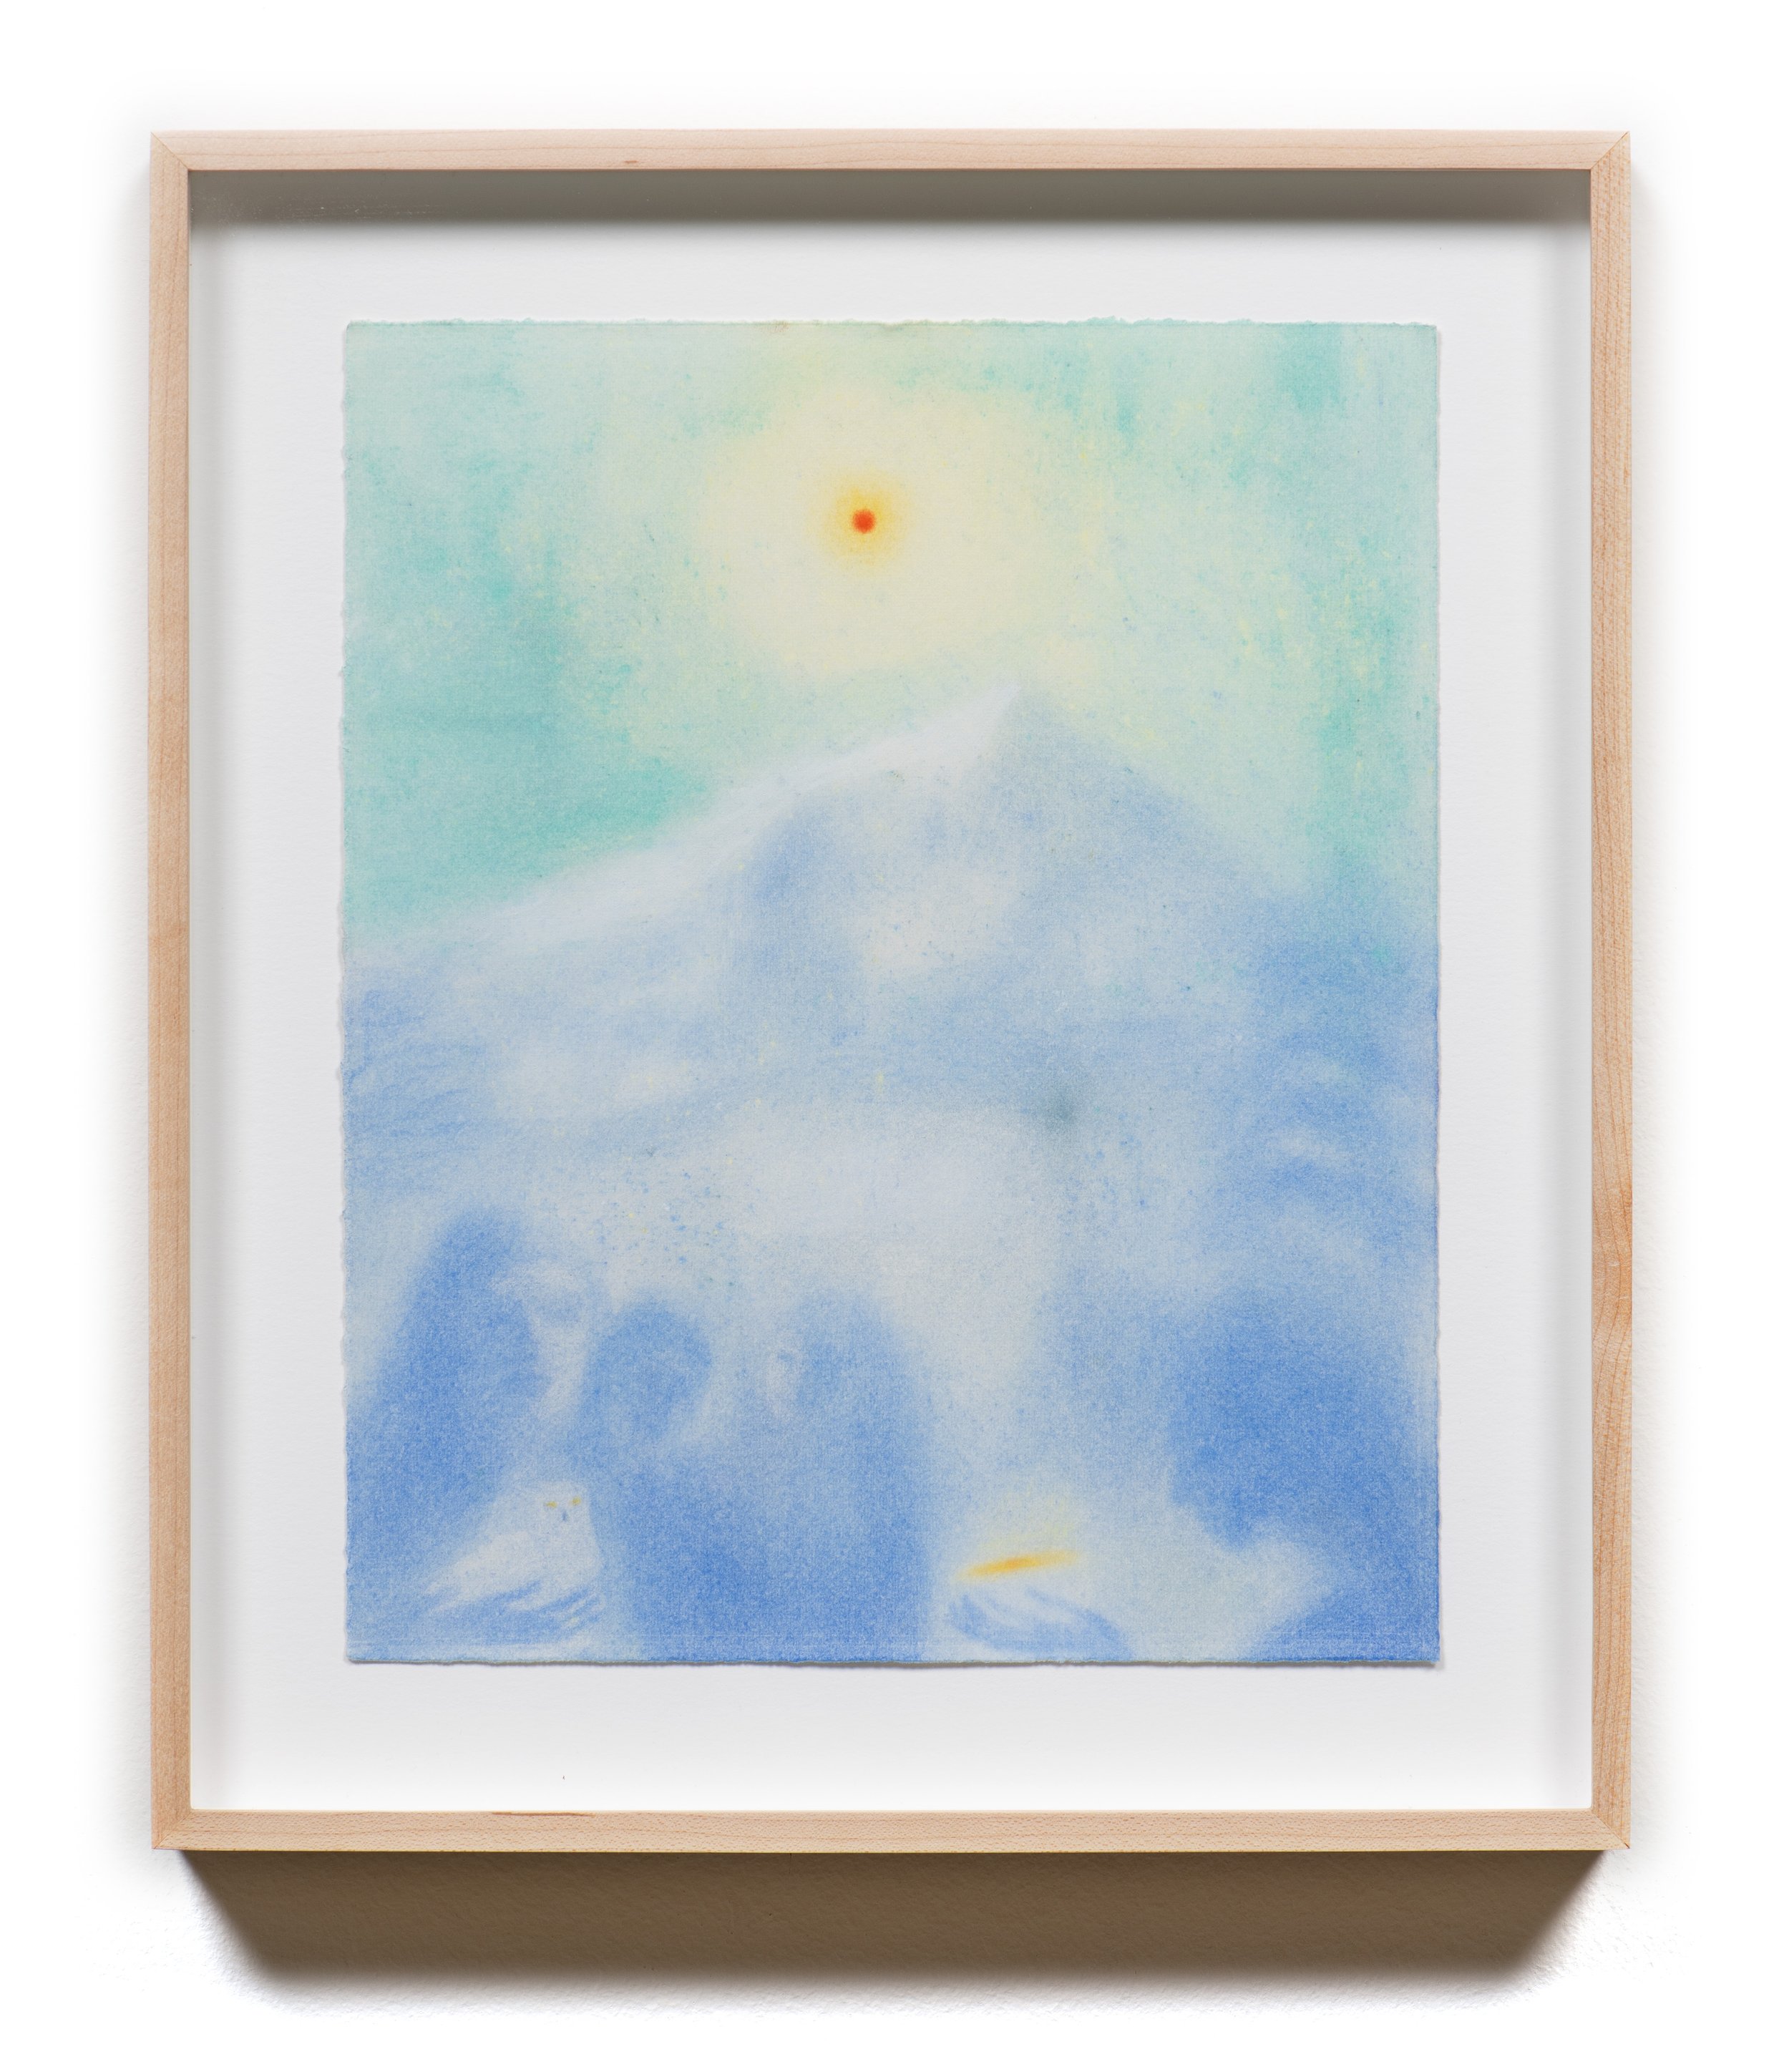   Like Glaciers , 2021 Soft pastel on paper 12 3/4 x 10 7/8 x 1 1/2 inches (framed) 